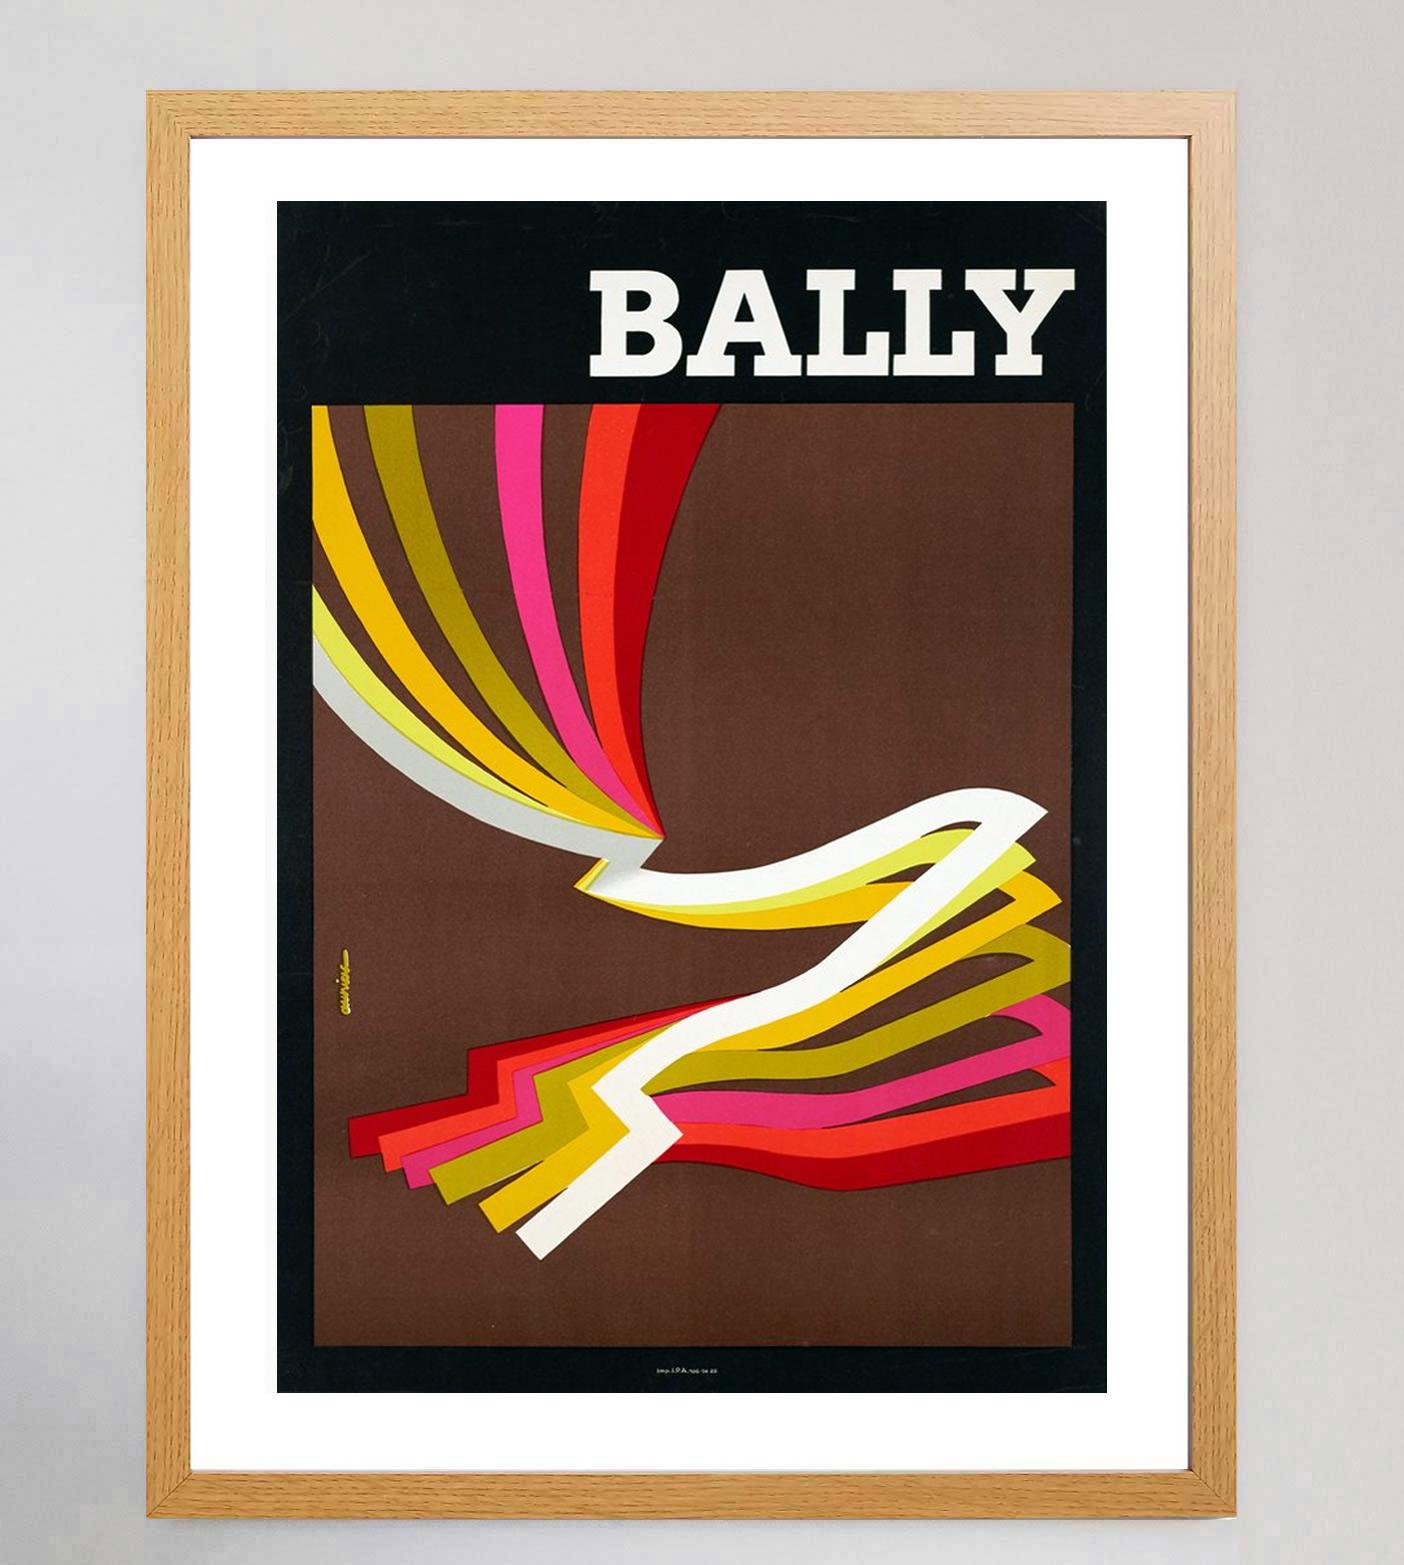 French 1981 Bally - Kinetic Man Original Vintage Poster For Sale